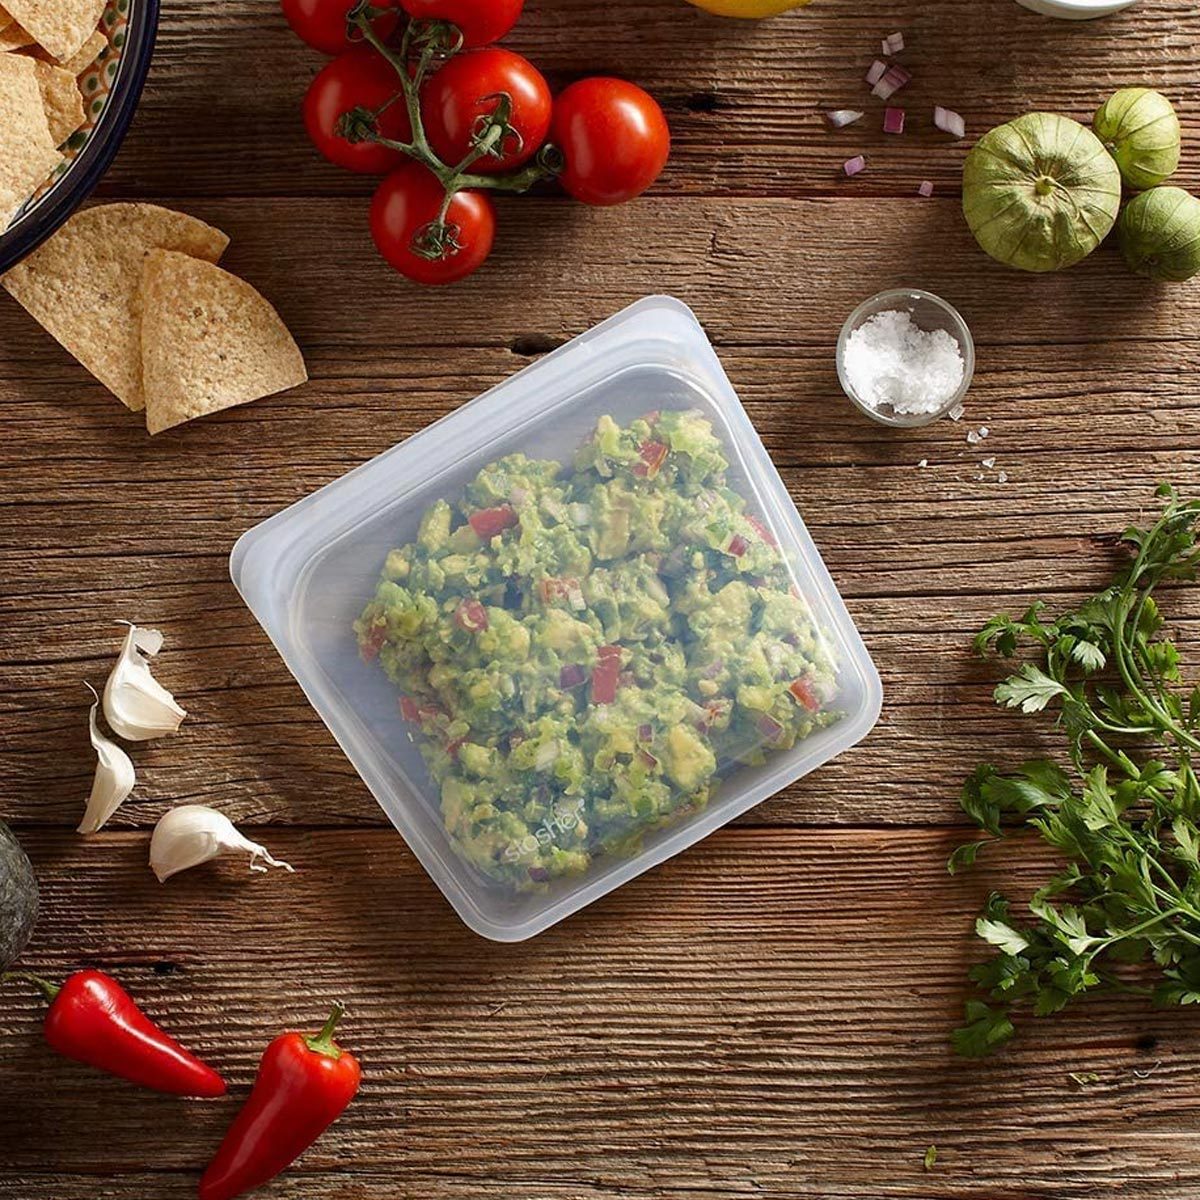 This Innovative Freezer Gadget Is a Meal Prep and Organizational Wonder